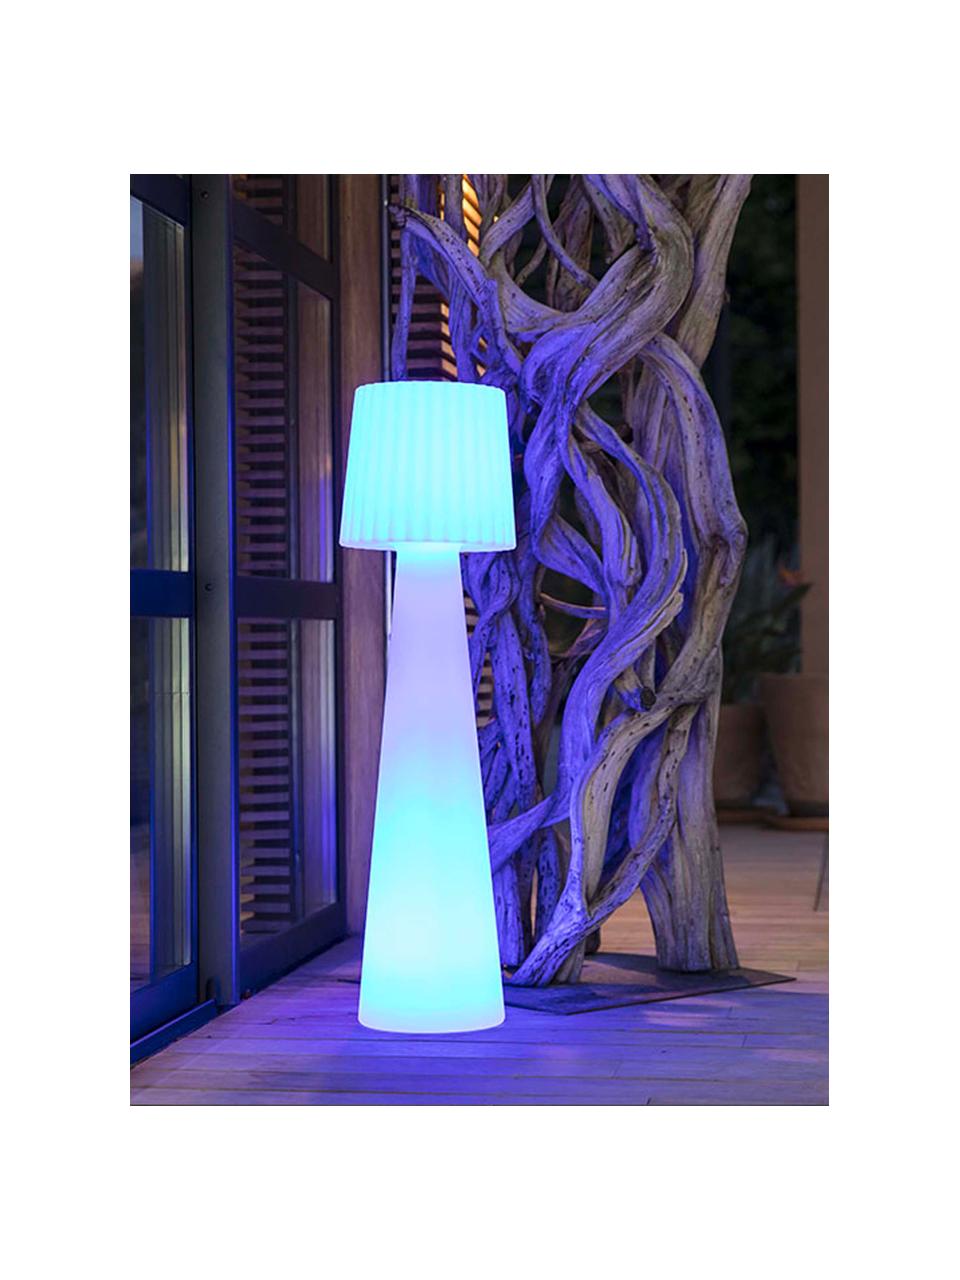 Mobile Outdoor LED-Stehlampe Lady mit Farbwechsel, dimmbar, Kunststoff, Weiss, H 110 cm